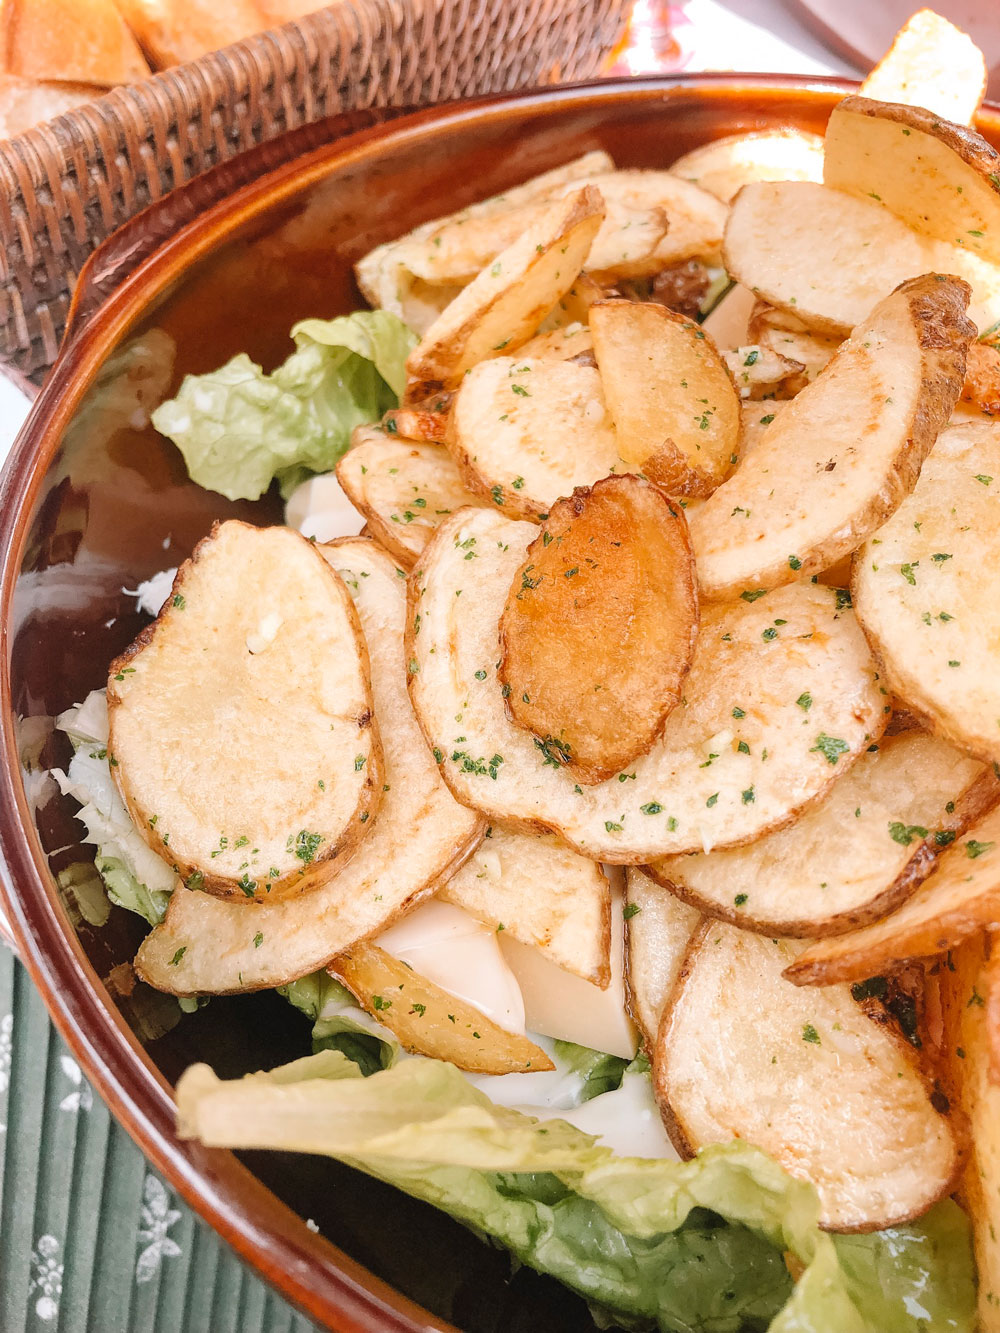 Salads with housemade potato chips at Le Relais Gascon